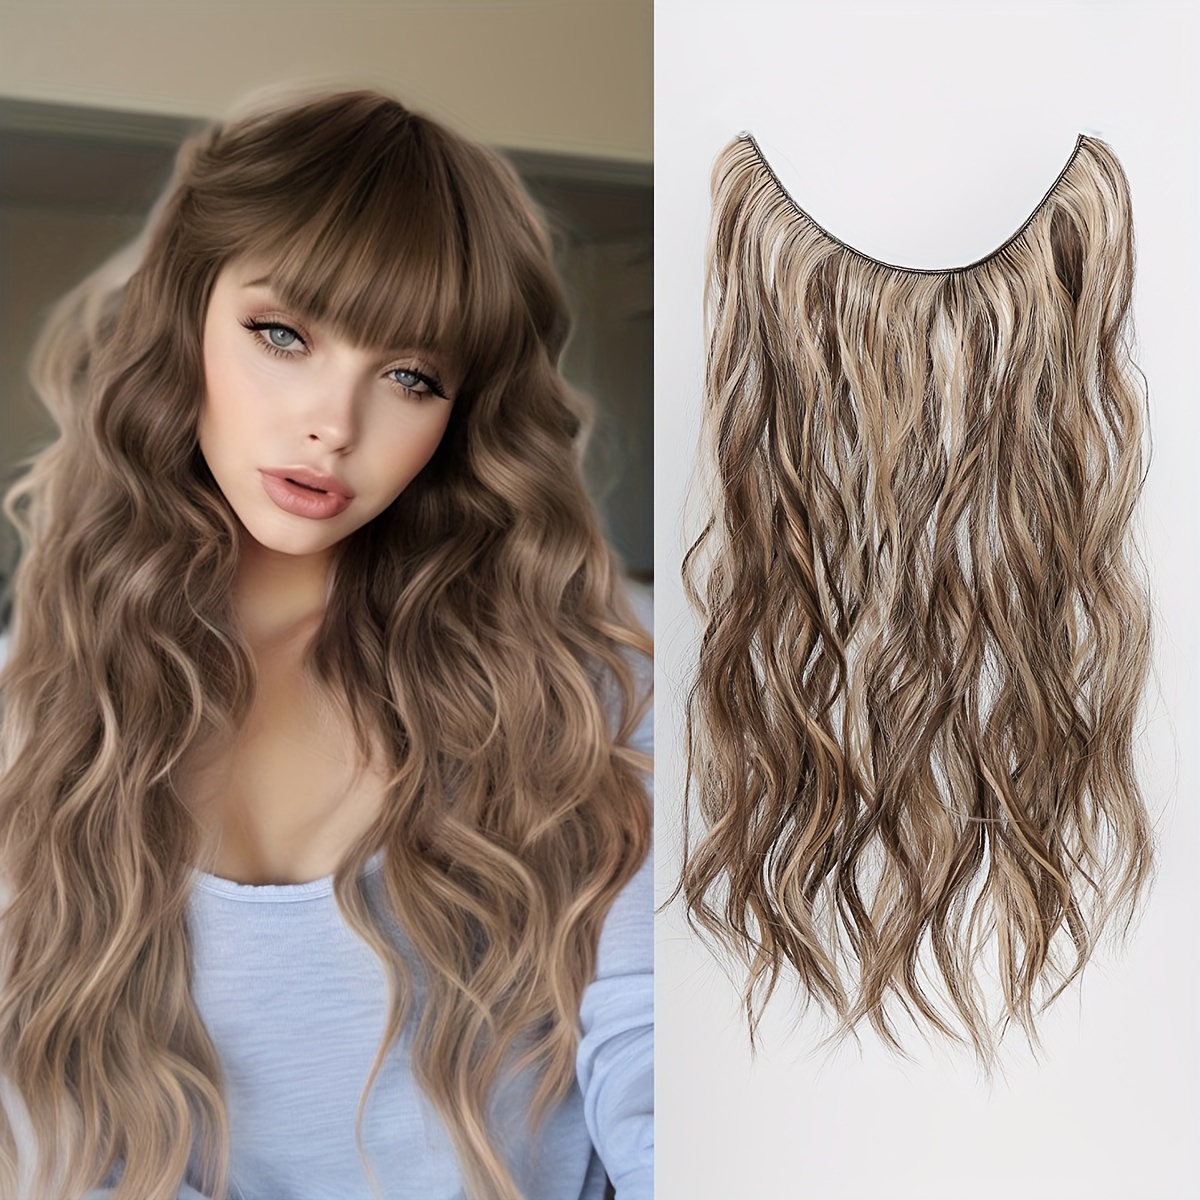 Long Wavy Invisible Wire Hair Extensions, Human Hair Extensions Synthetic Hairpiece with Transparent Wire Adjustable size, Light Ash Brown with